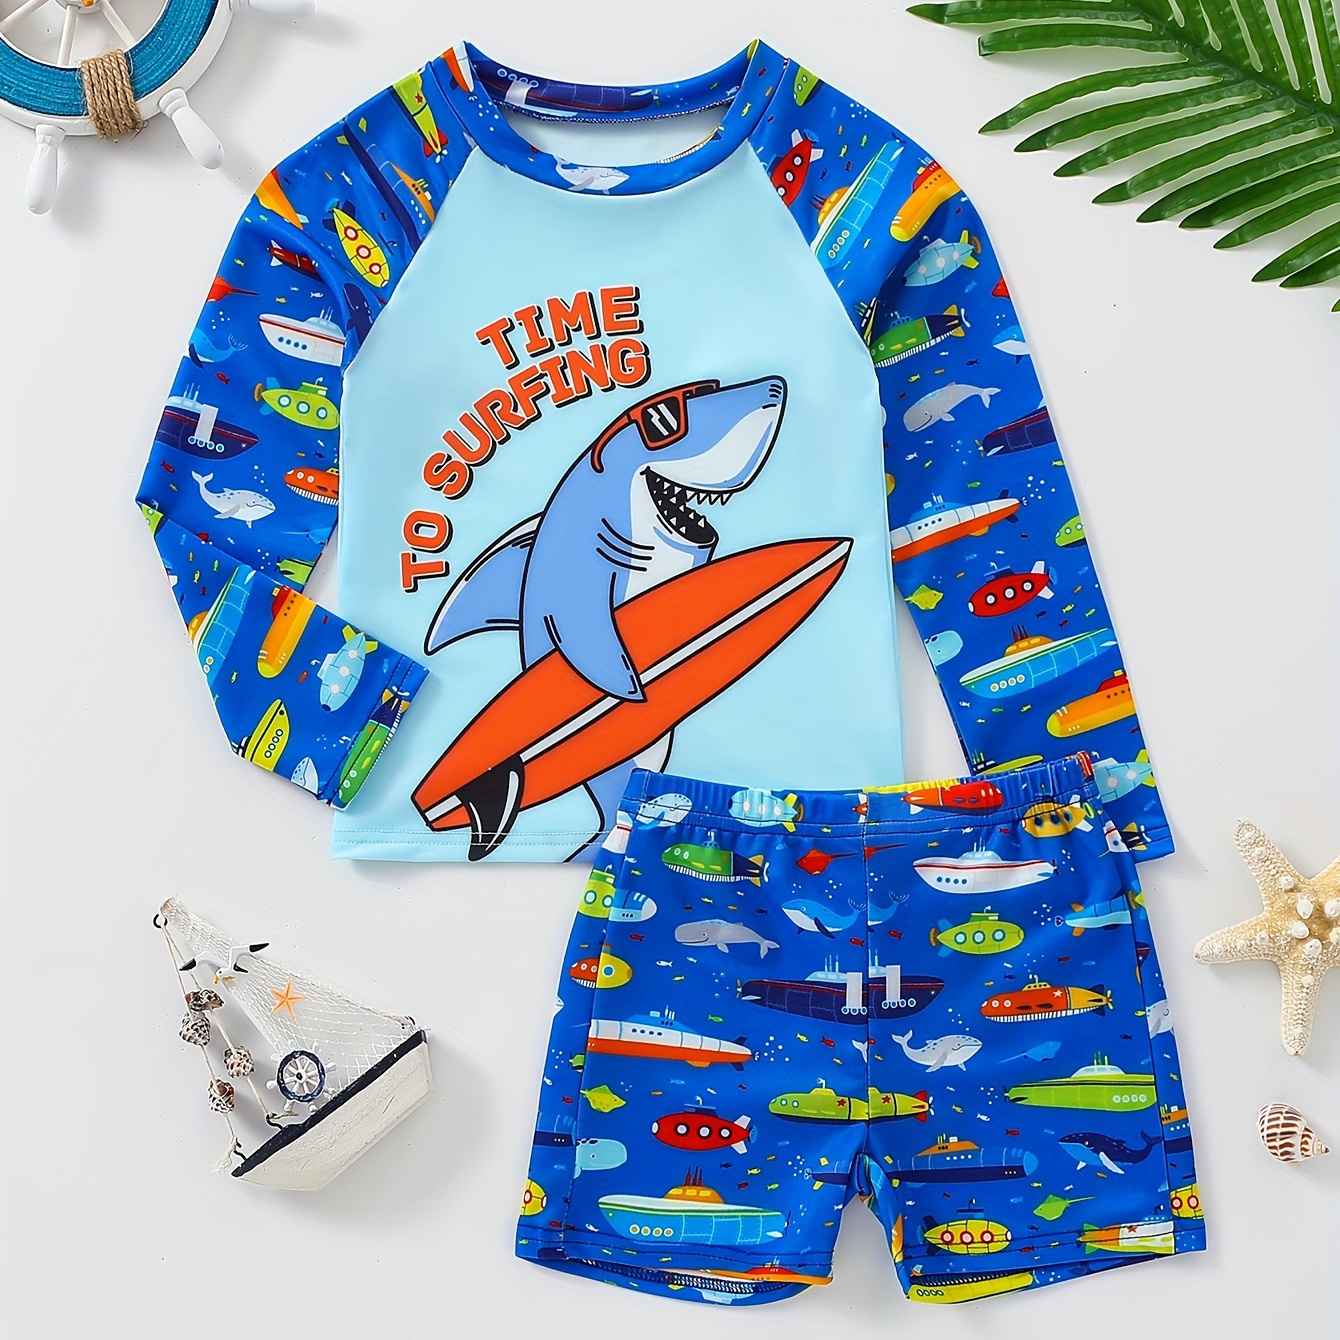 

2pcs Cartoon Submarine And Shark Pattern Swimsuit For Boys, T-shirt & Swim Trunks Set, Stretchy Surfing Suit, Boys Swimwear For Summer Beach Vacation